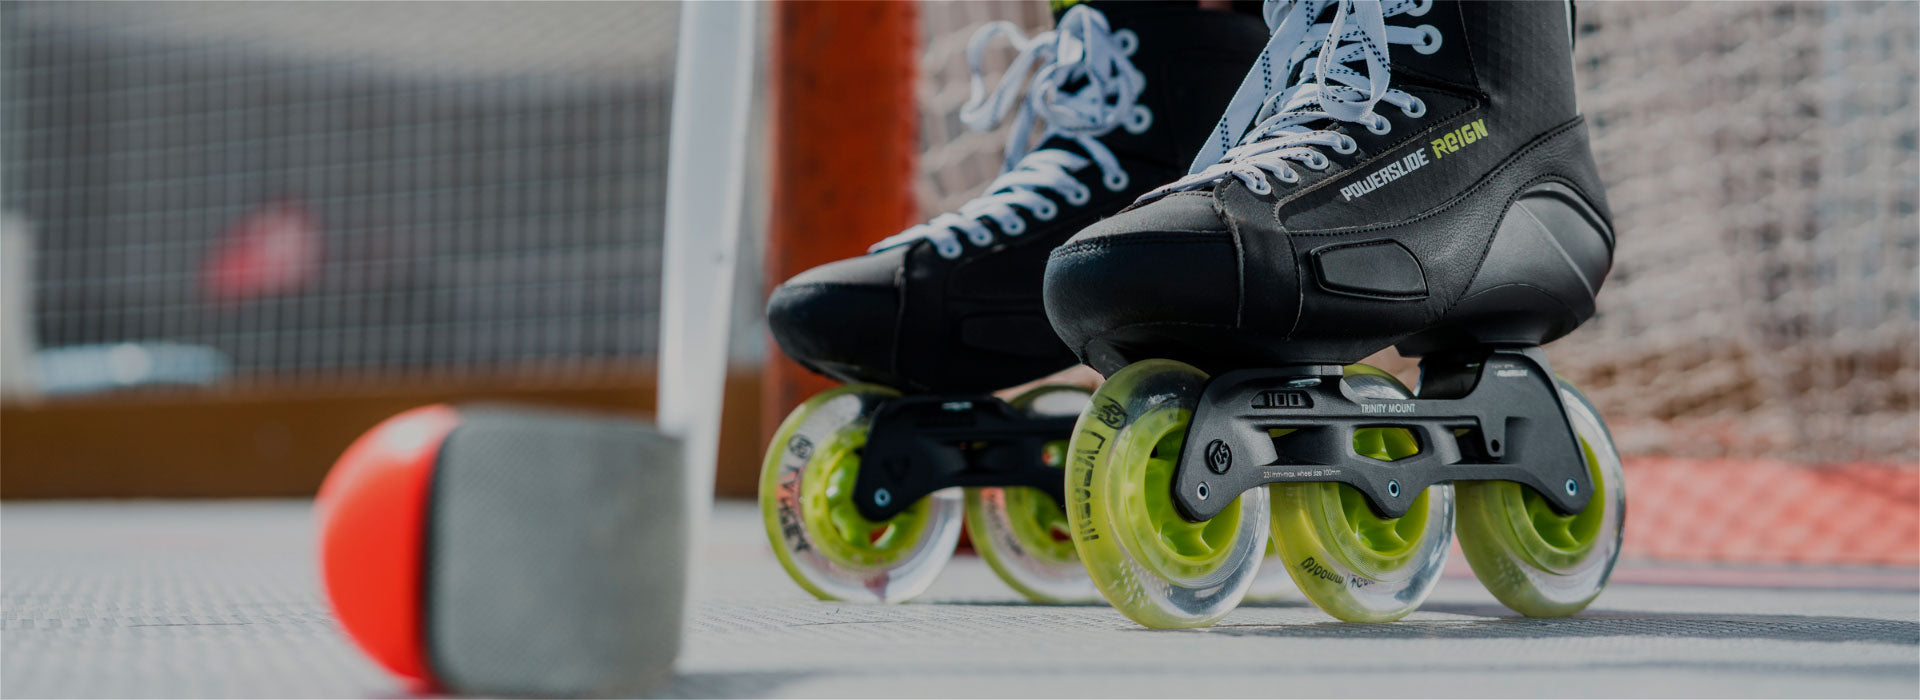 A close-up image of 3-wheel Powerslide Reign inline roller hockey skates with a hockey net in the background